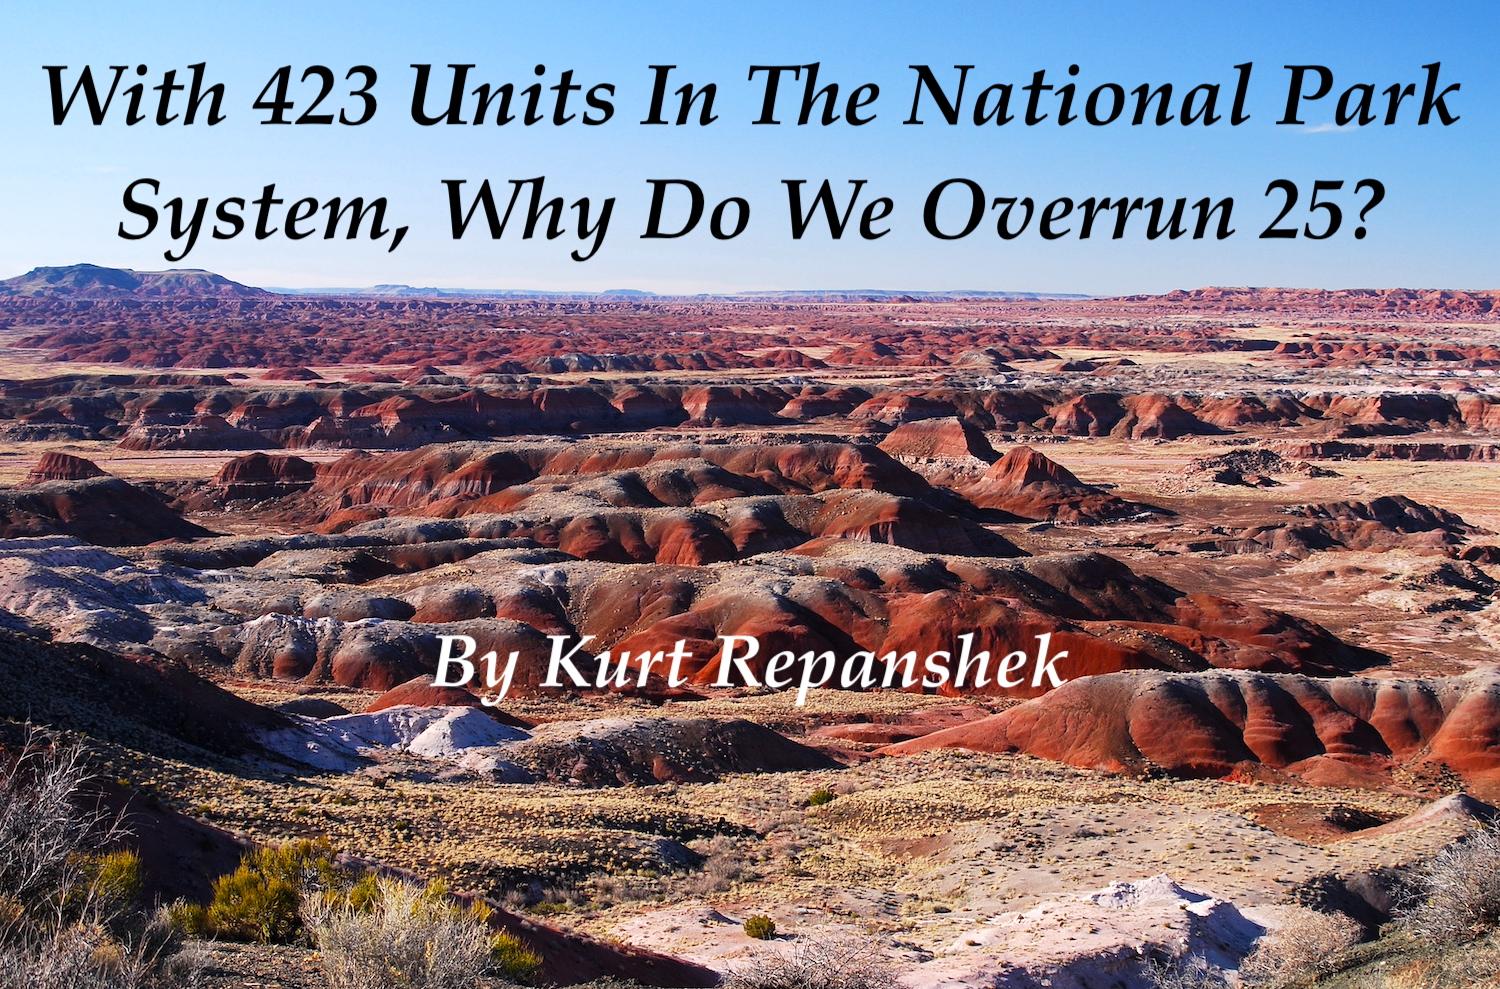 With 423 units in the National Park System, why do we overrun 25.